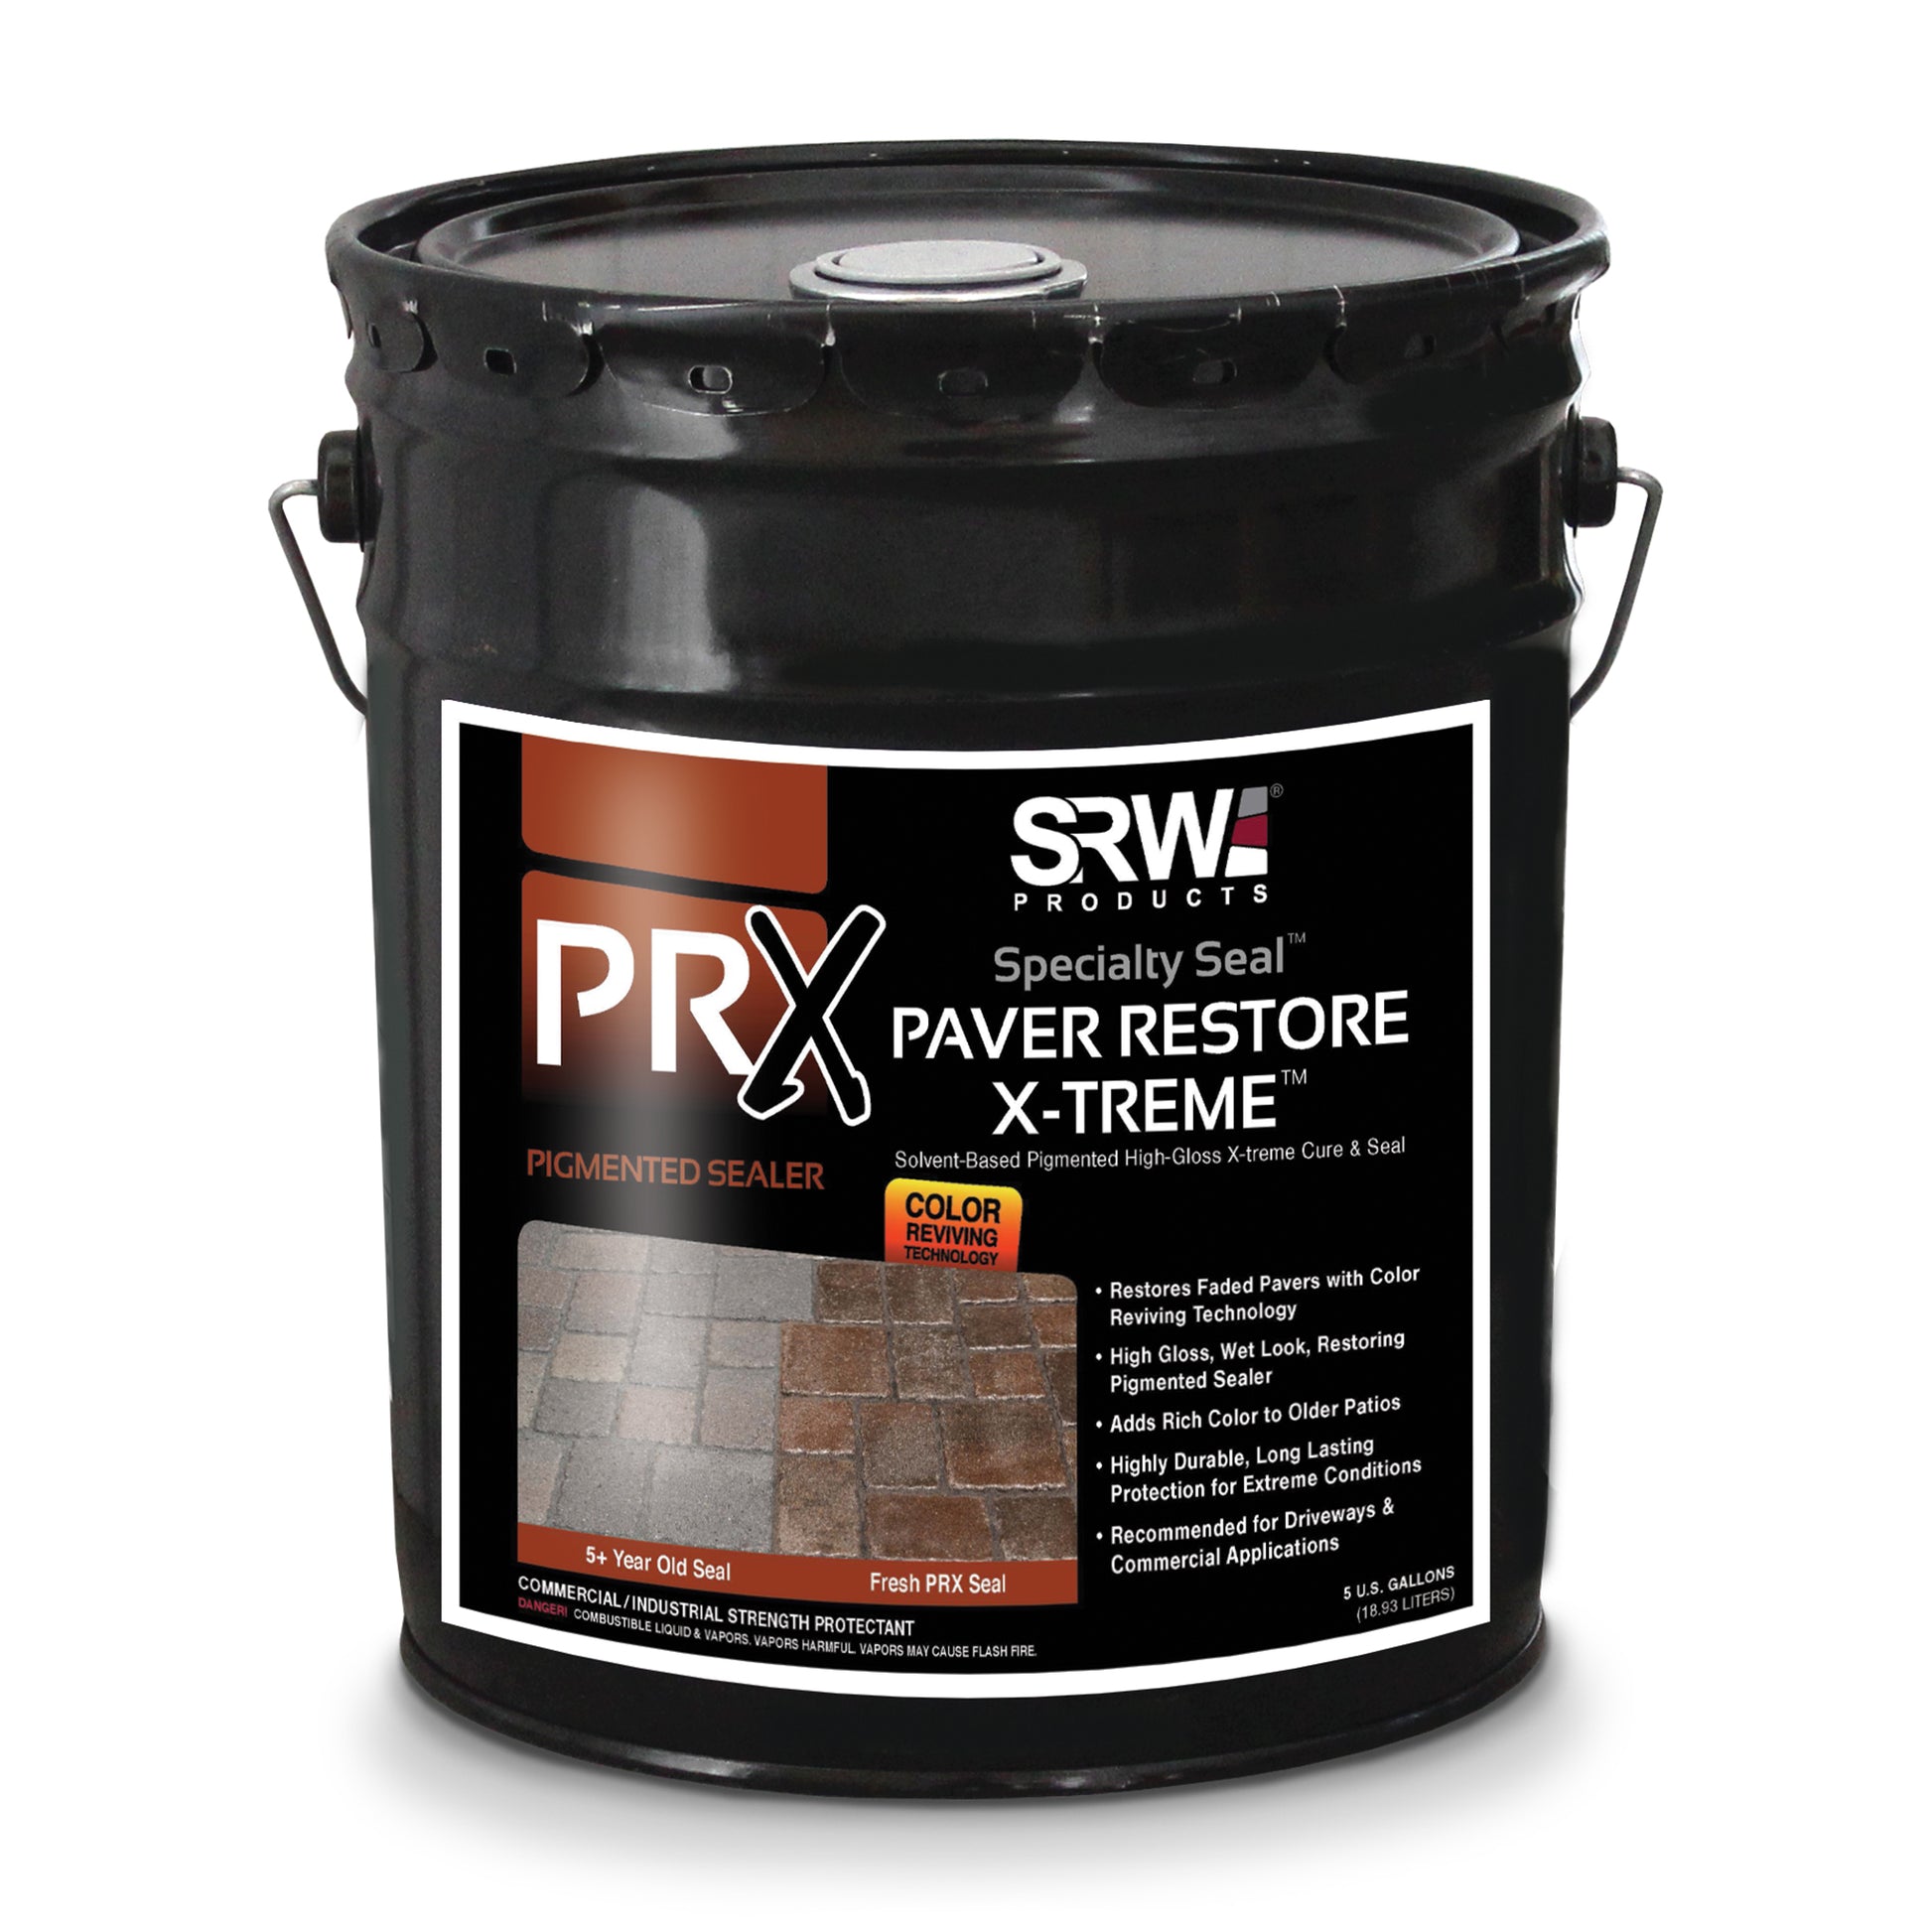 SRW Products PRX Paver Restore X-treme - Specialty Seal™ bucket